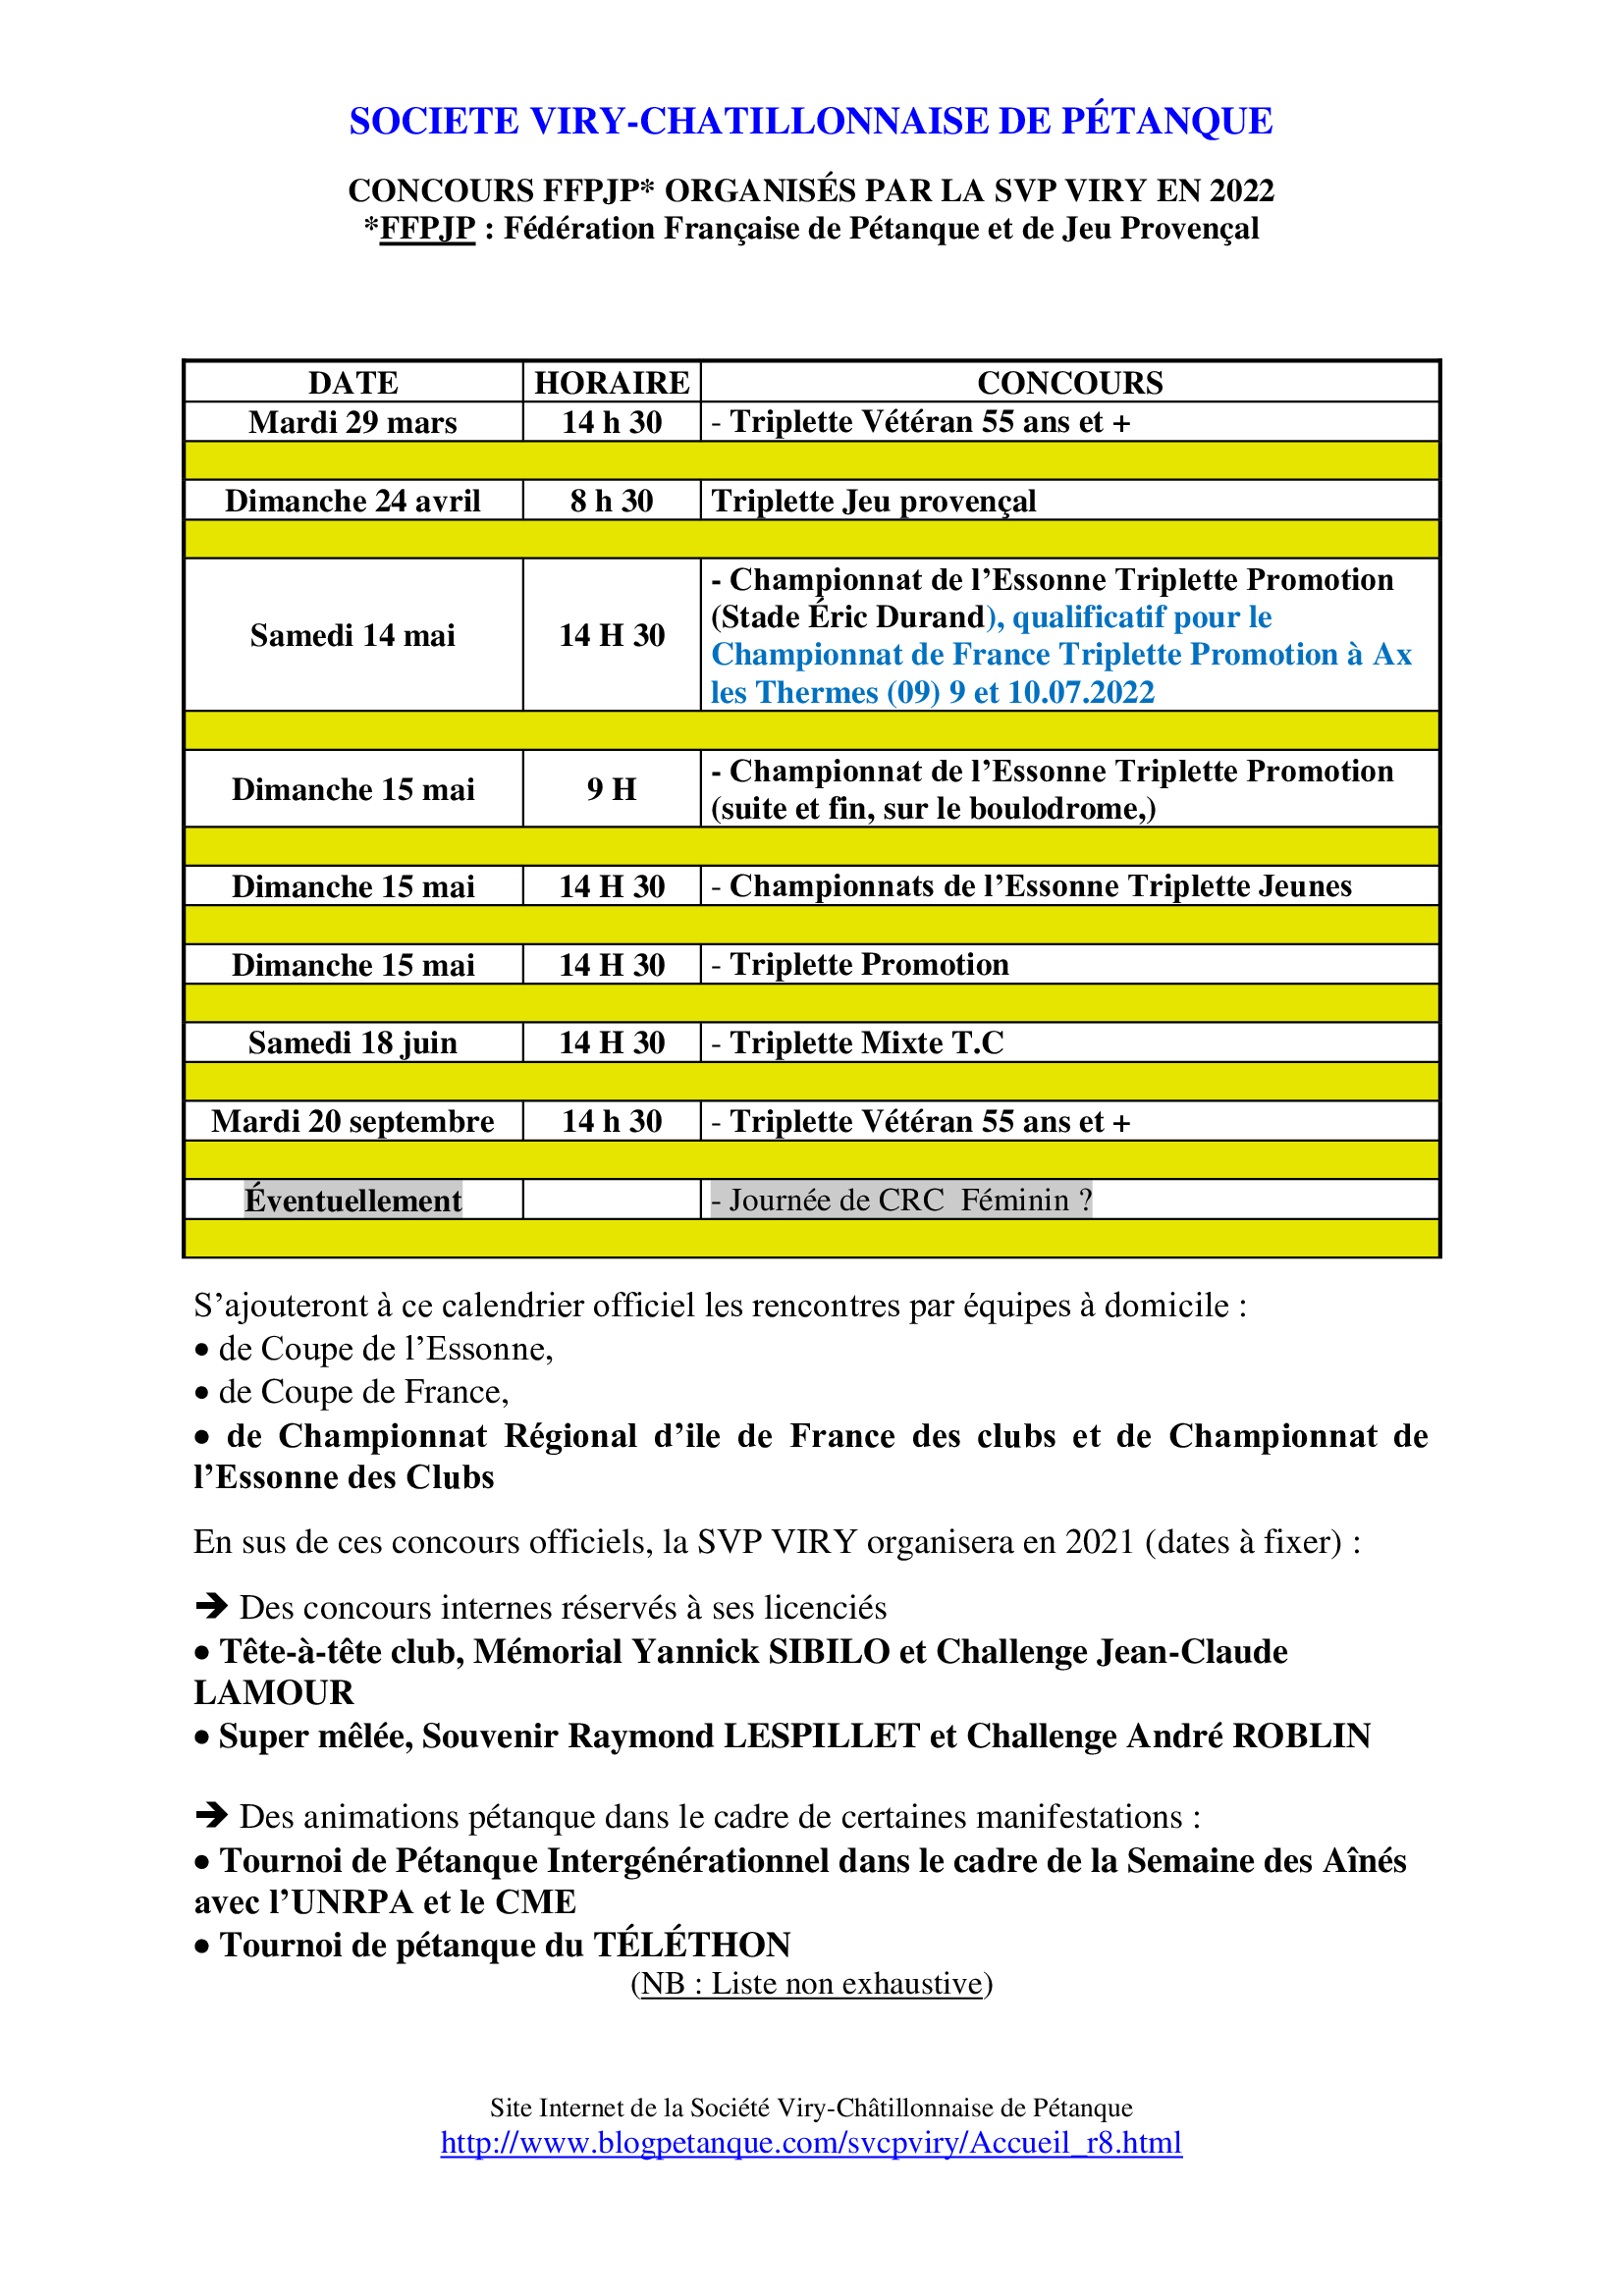 Concours SVCP 2021